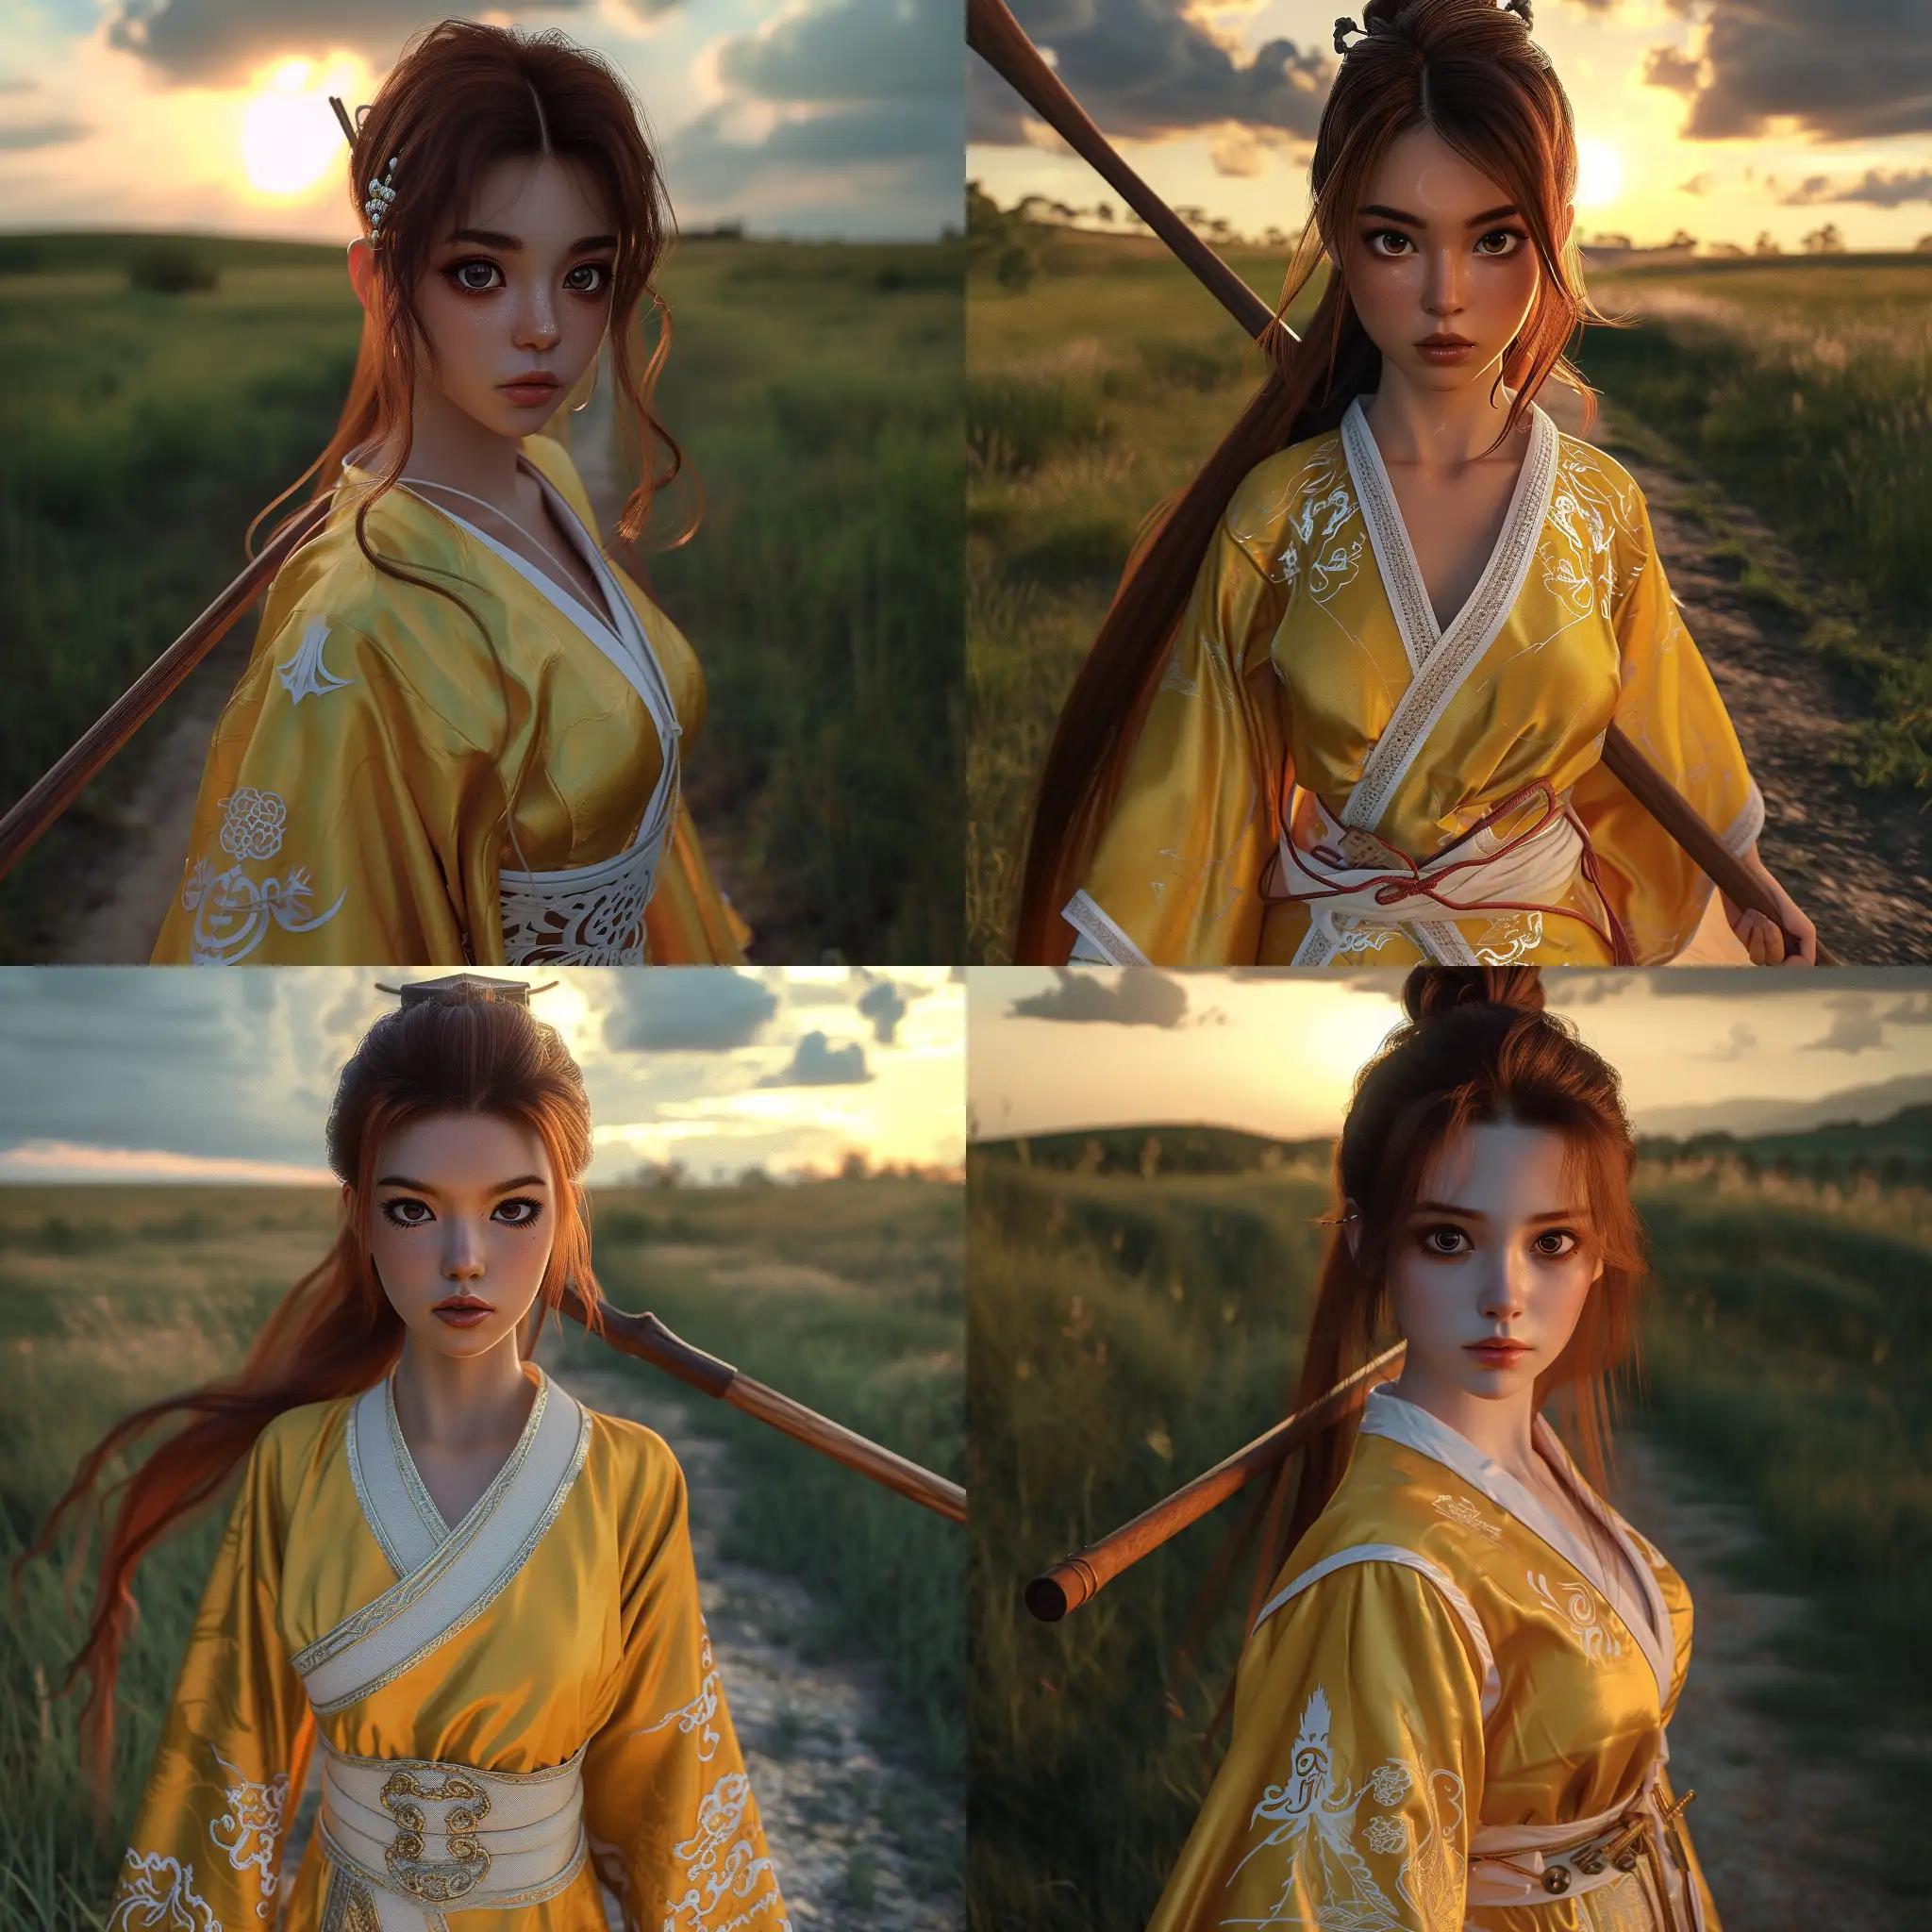 (masterpiece), (extremely intricate:1.3), full body of a girl, the most beautiful artwork in the world, cinematic lighting, octane render, unreal engine, standing outside on a dirt path under the gorgeous noon sky with a full sun, volumetrics dtxa full body photography of a gorgeous auburn haired Asian woman with beautiful detailed dark brown colored eyes wearing a silky yellow Asian warrior robe with white trim with intricate designs, tan skin, long length beautiful auburn full hair in a ponytail, beautiful detailed dark brown colored eyes, symmetrical eyes, gorgeous makeup, glossy lips, standing in a grassy field, holding a wooden staff in her left hand and the staff is resting on across her shoulders, looking at viewer, attractive, flirting, detailed skin, highly detailed, hyperrealism, cinematic lighting, dark studio, rim lighting, two tone lighting, dimly lit, low key, 8k, ultra high definition, beautiful, amazing, stunning, Asian woman, brown skinned woman, absolutely gorgeous stunning art, best art ever, medium distance from viewer, very detailed, beautiful large baby doll eyes, vibrant beautiful colors, dark brown eyes
